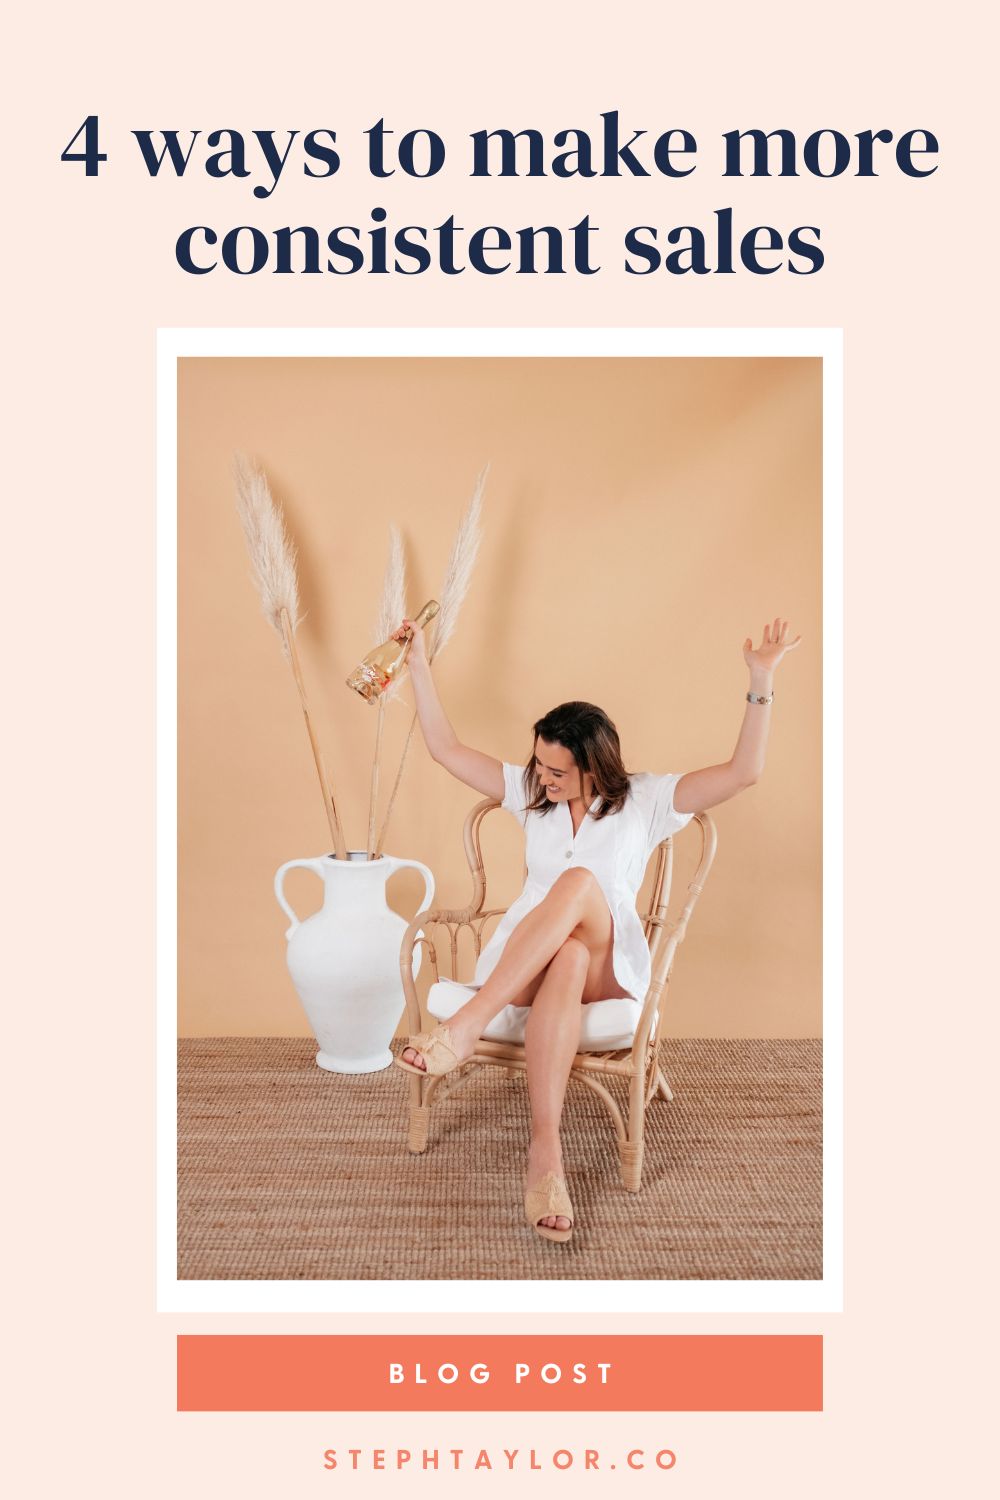 4 ways to make more consistent sales